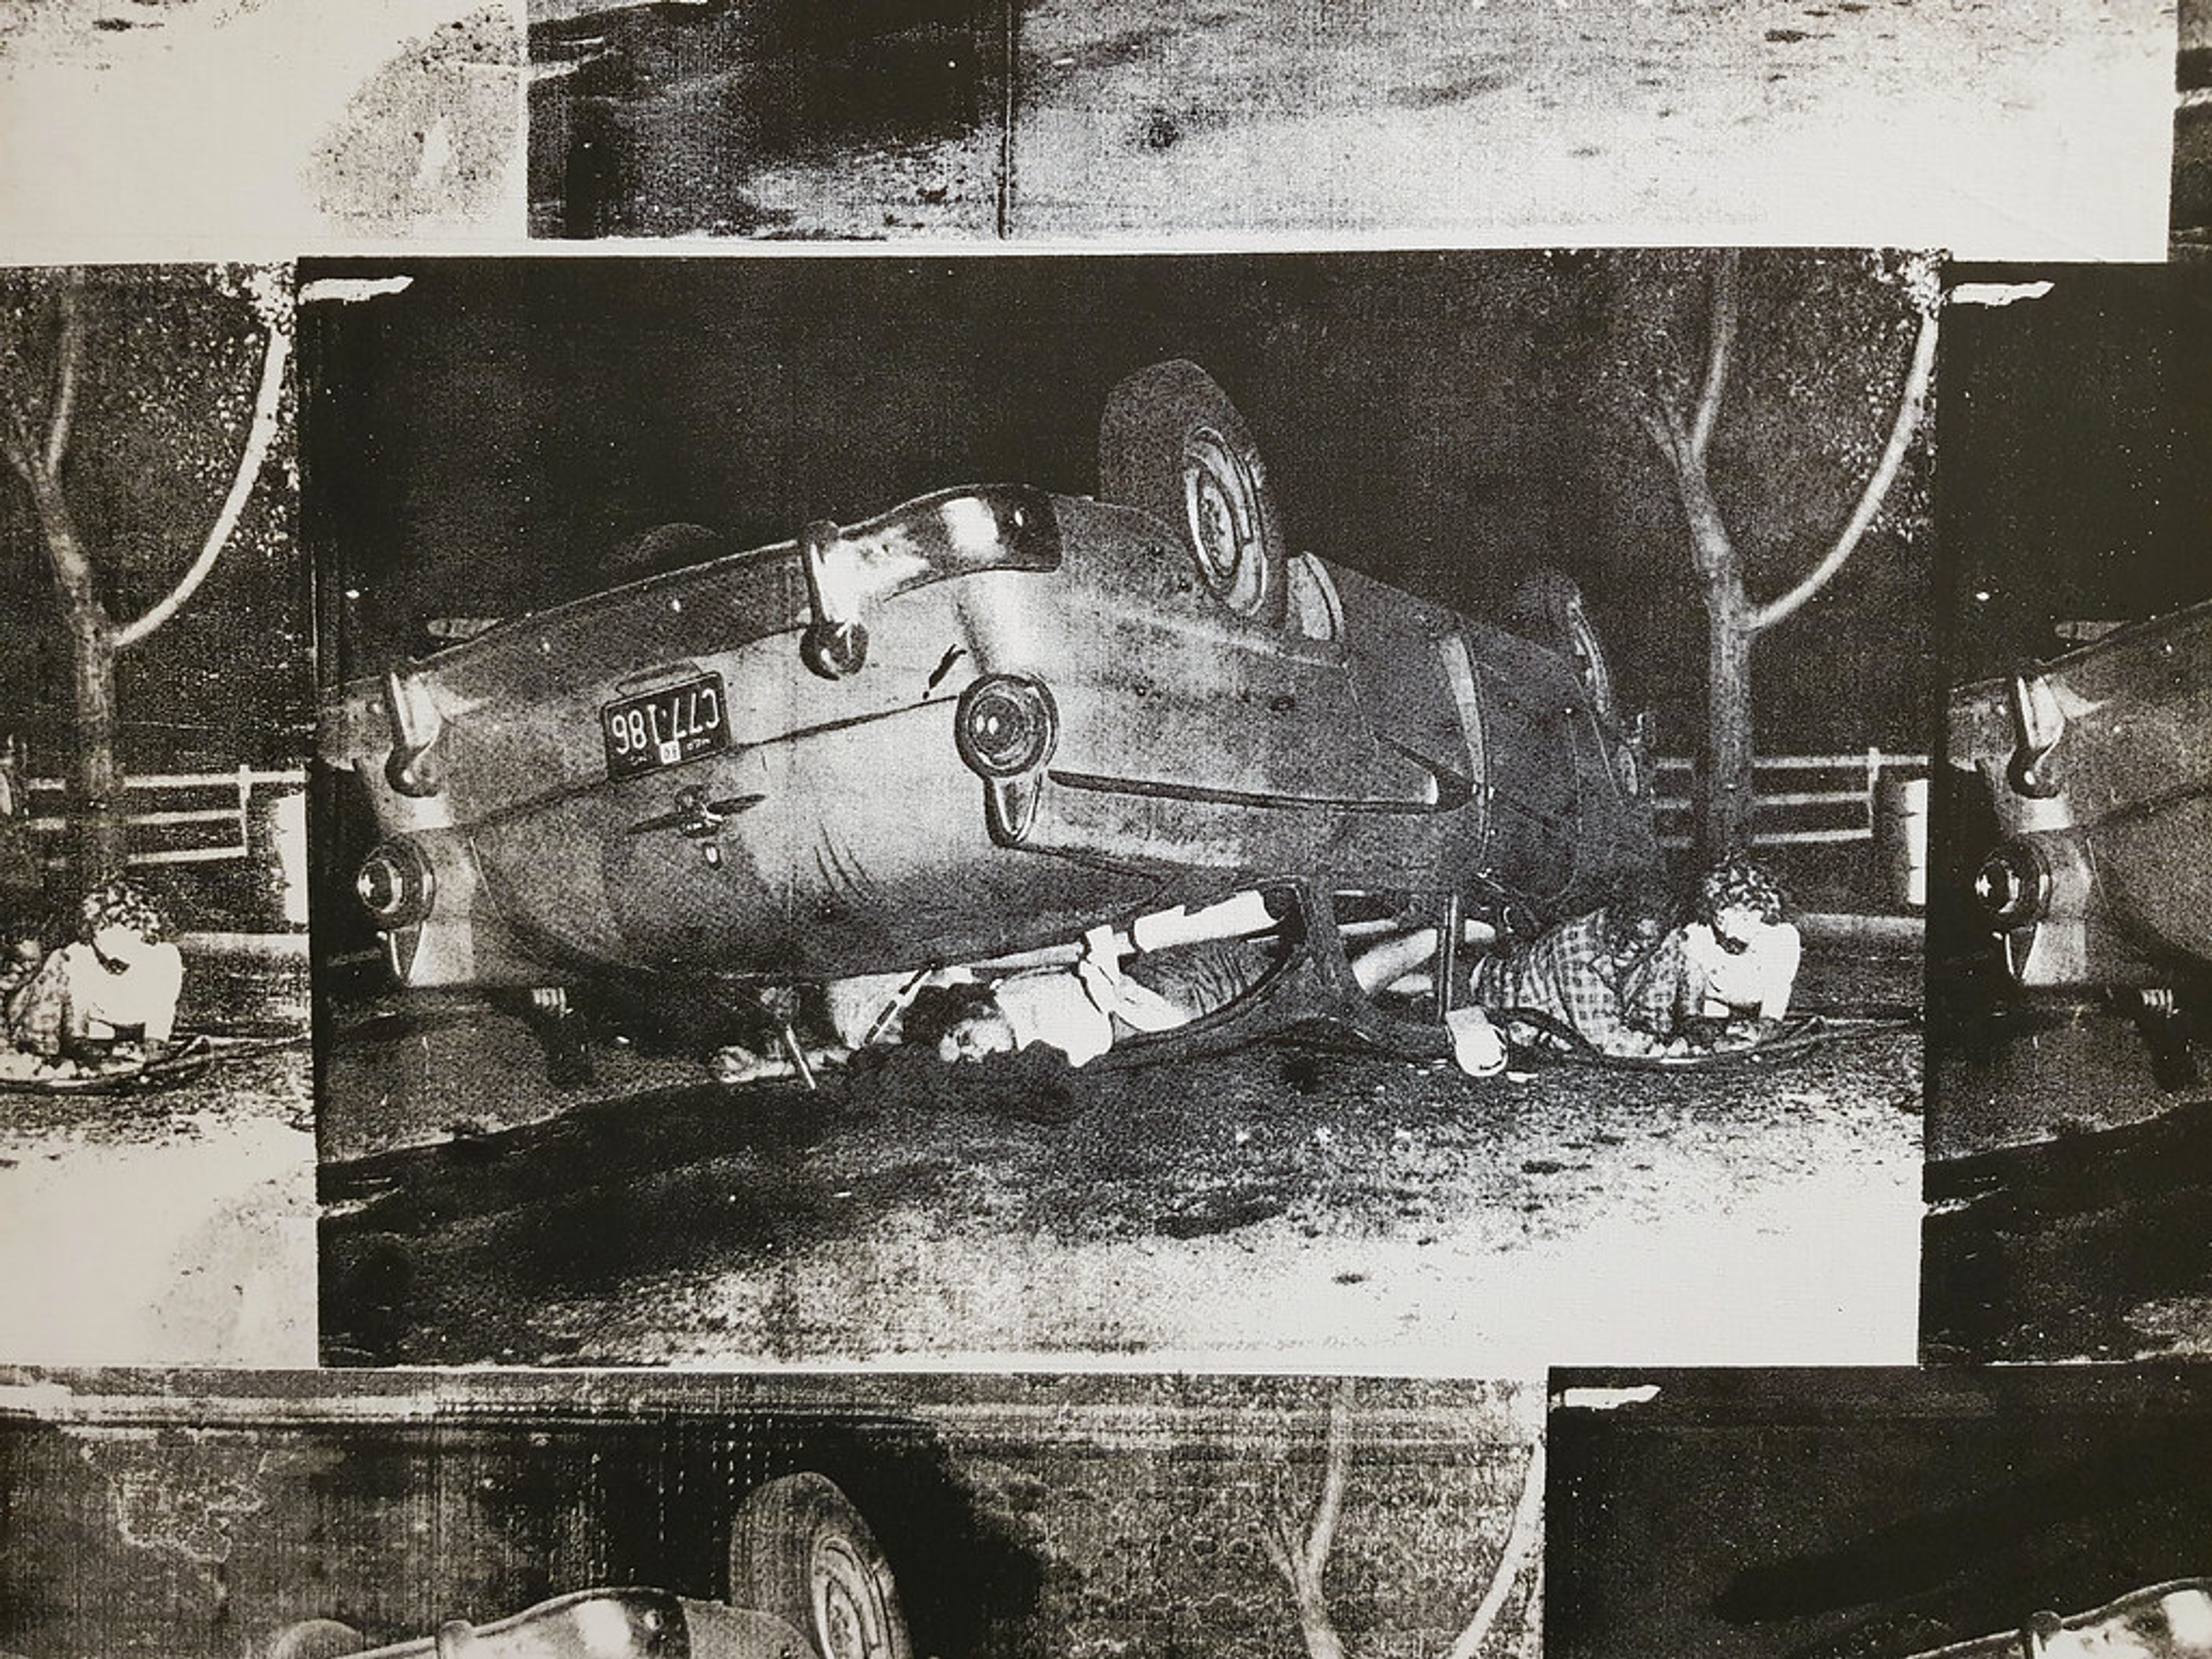 An image of the artwork 5 deaths by Andy Warhol, showing an overturned car. Several bodies can be seen in the wreckage.